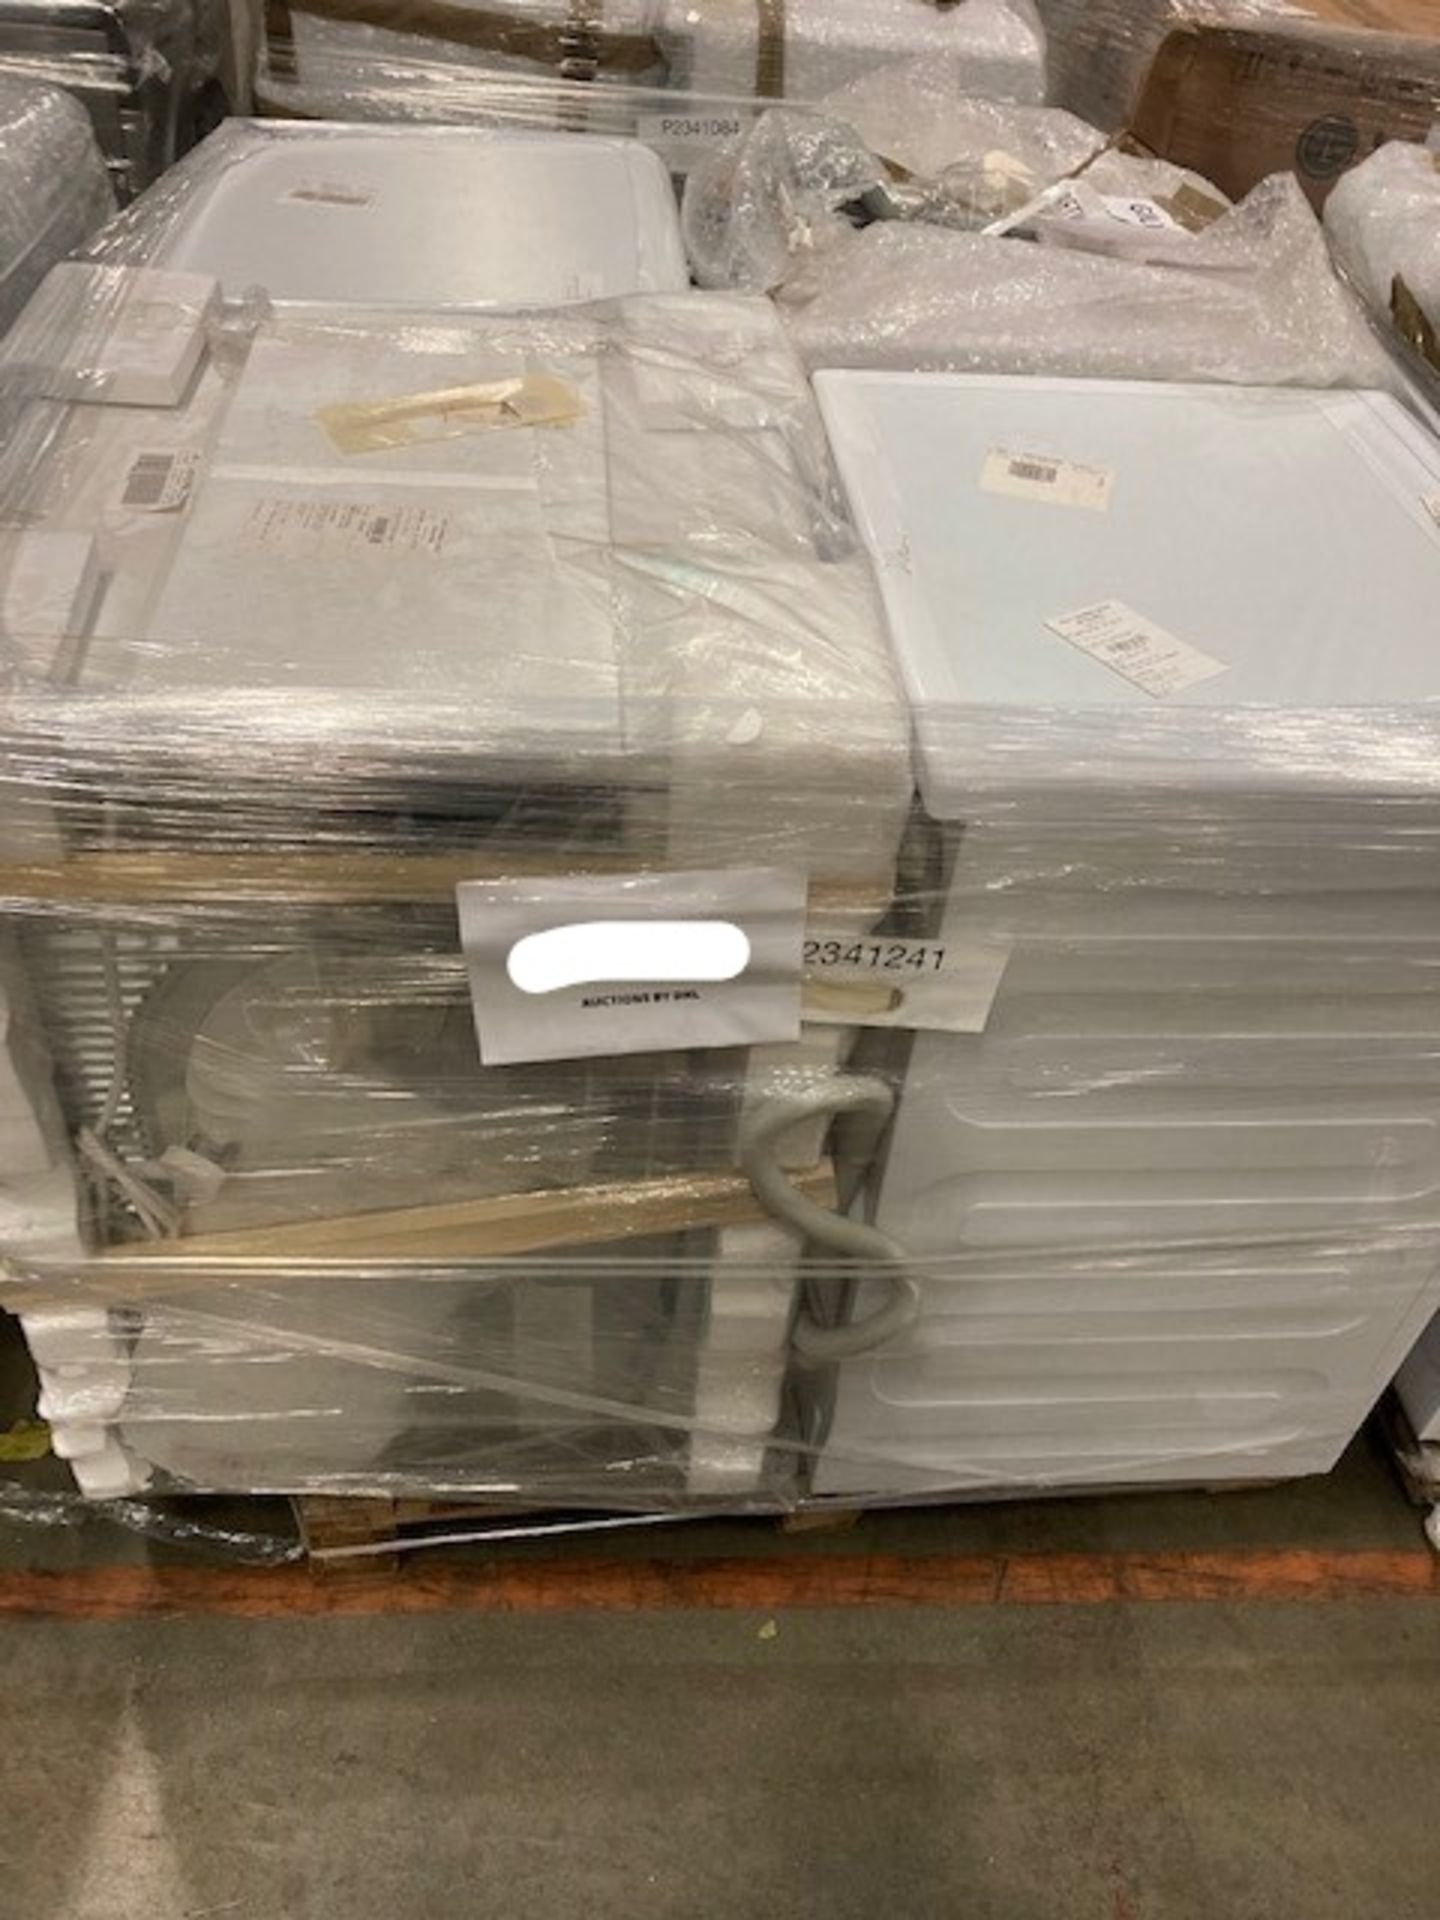 Pallet of Mixed Laundry Goods. Brands include HISENSE & INDESIT. Latest selling price £1469.96 - Image 4 of 4